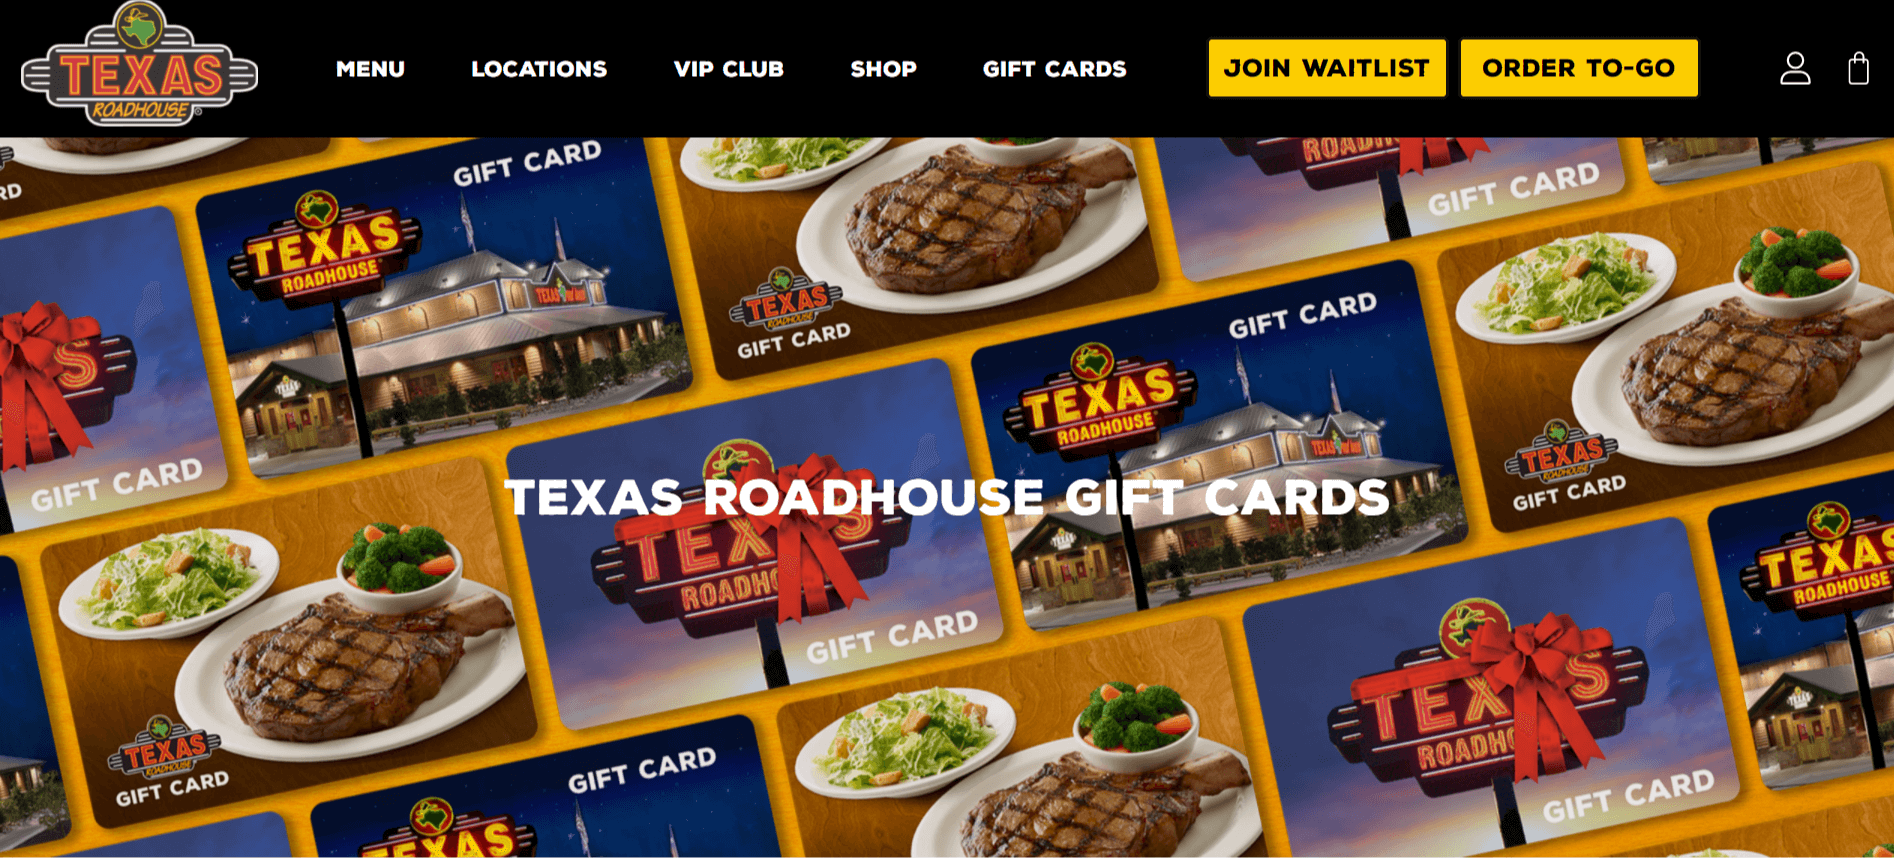 Gift-Cards-Texas-Roadhouse